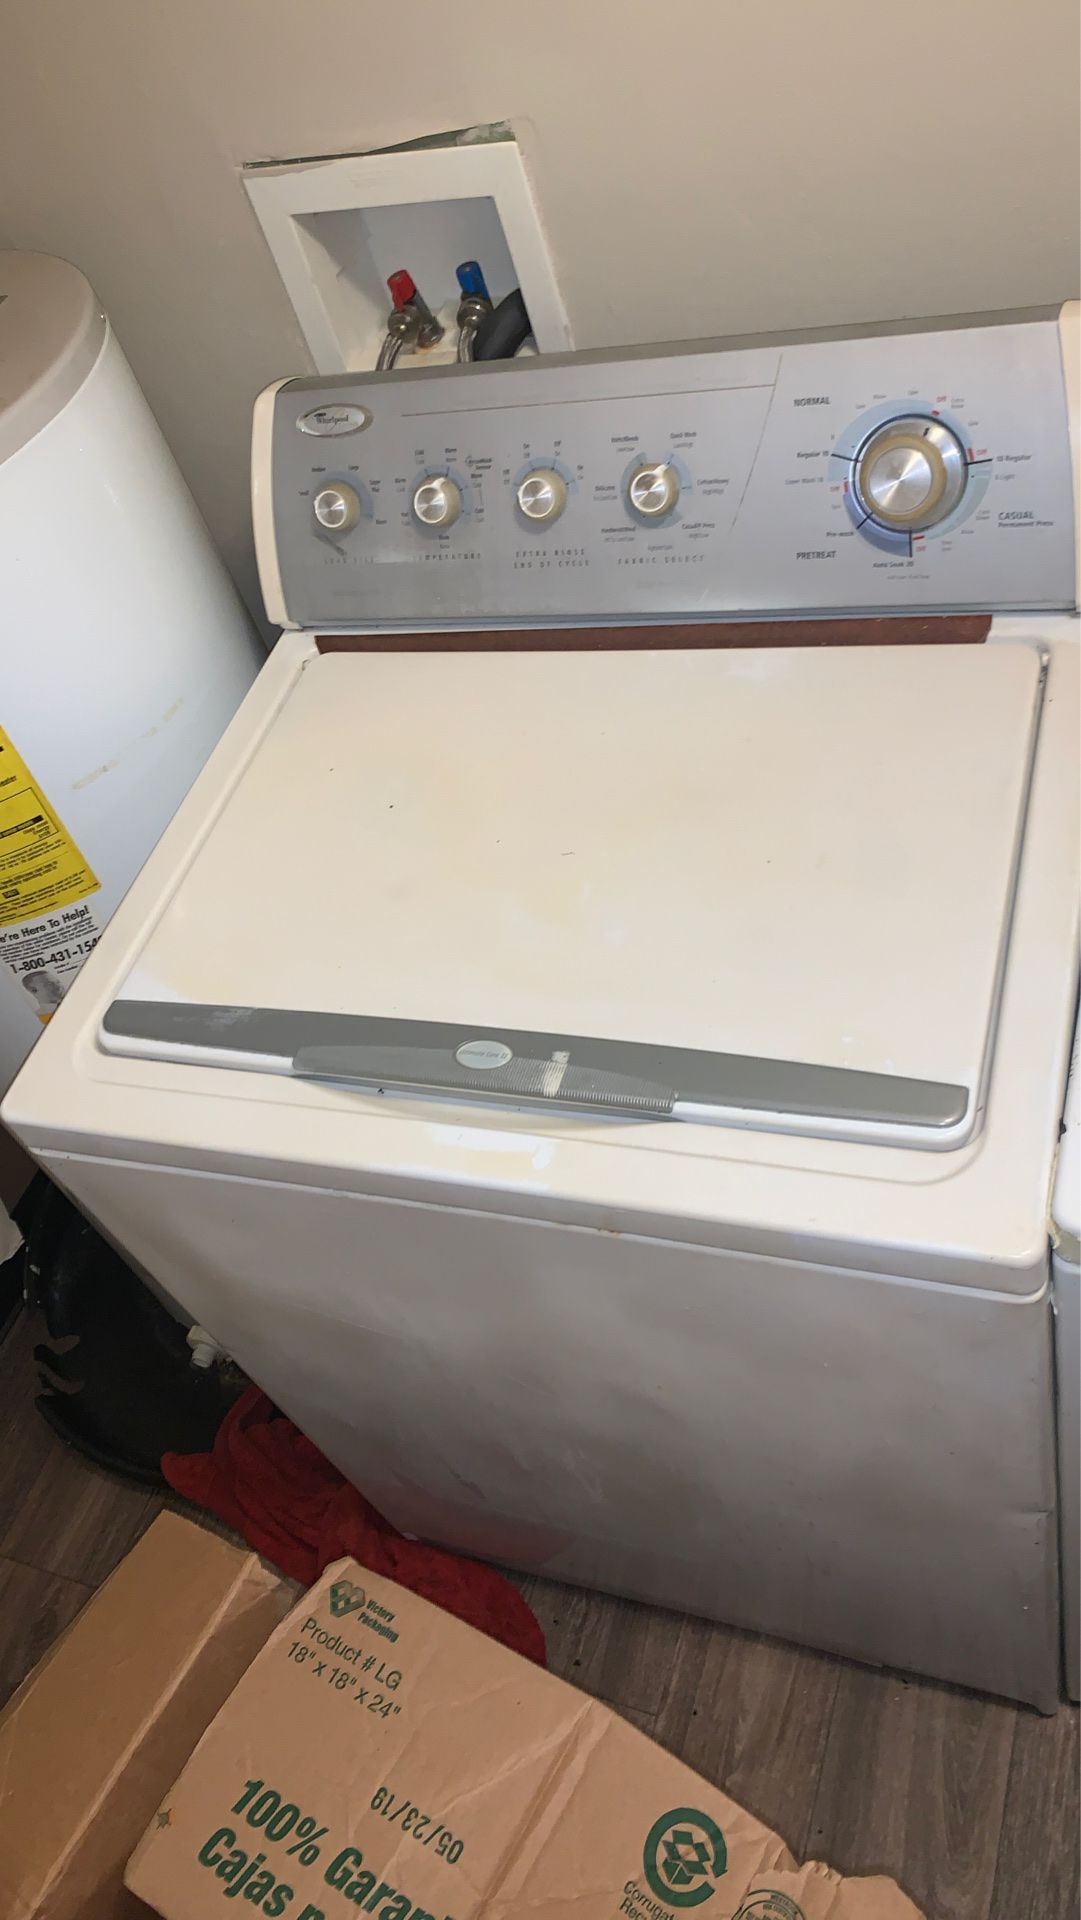 Whirlpool washer and dryer works great just got new ones